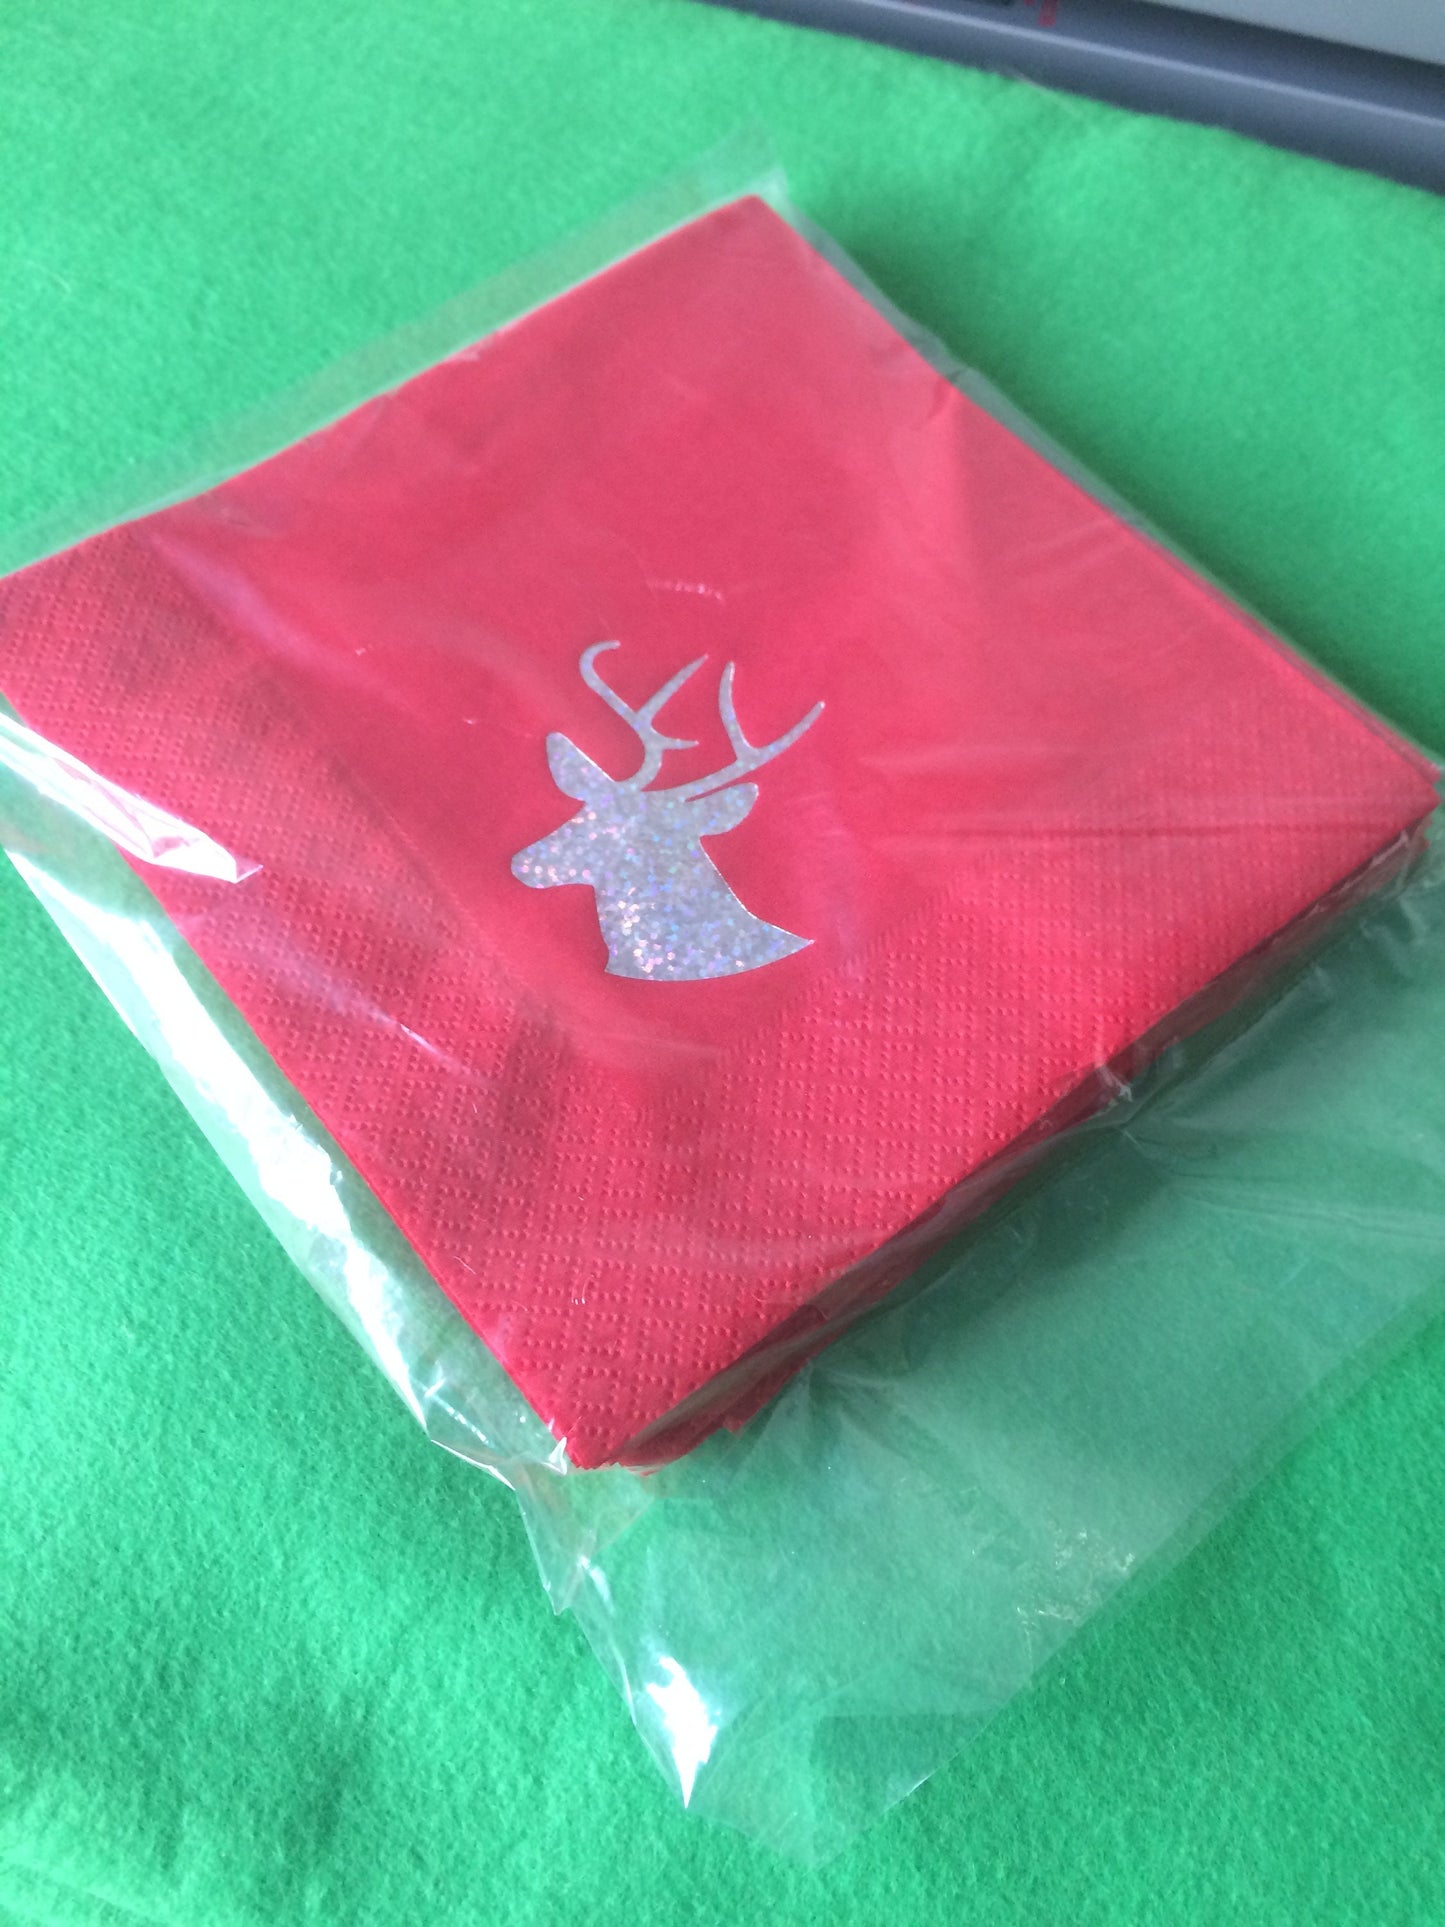 Christmas Party Bright Red 40cm 3ply Dinner Napkins Serviettes with Stags Head / Reindeer Design in Sparkling Silver